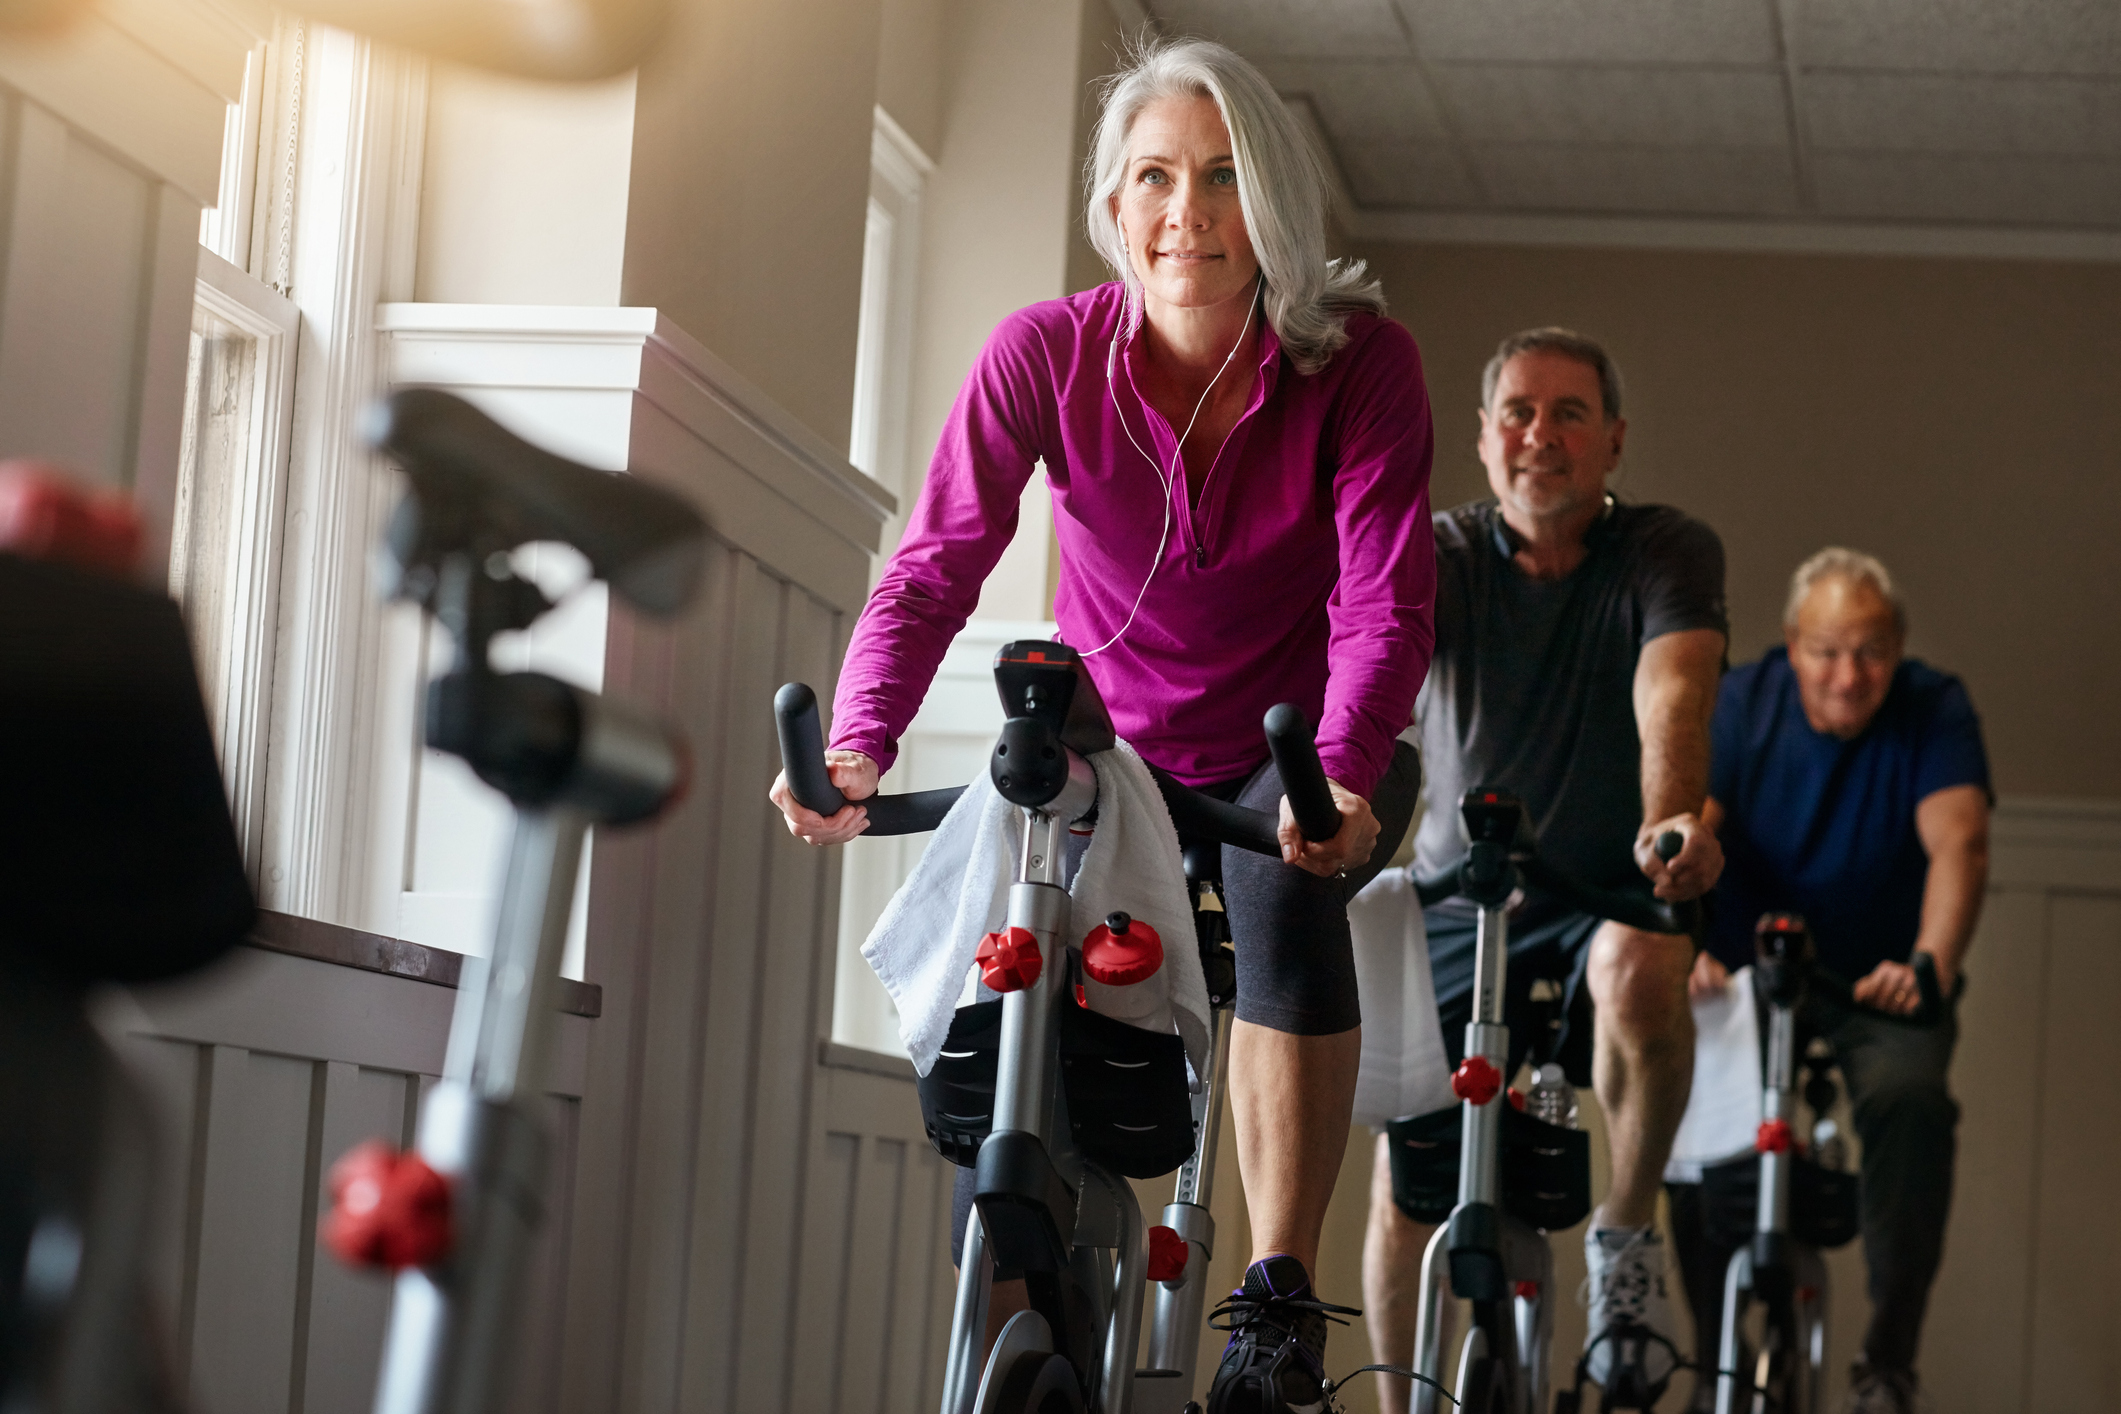 What are the benefits of a spin class? An expert PT on spinning